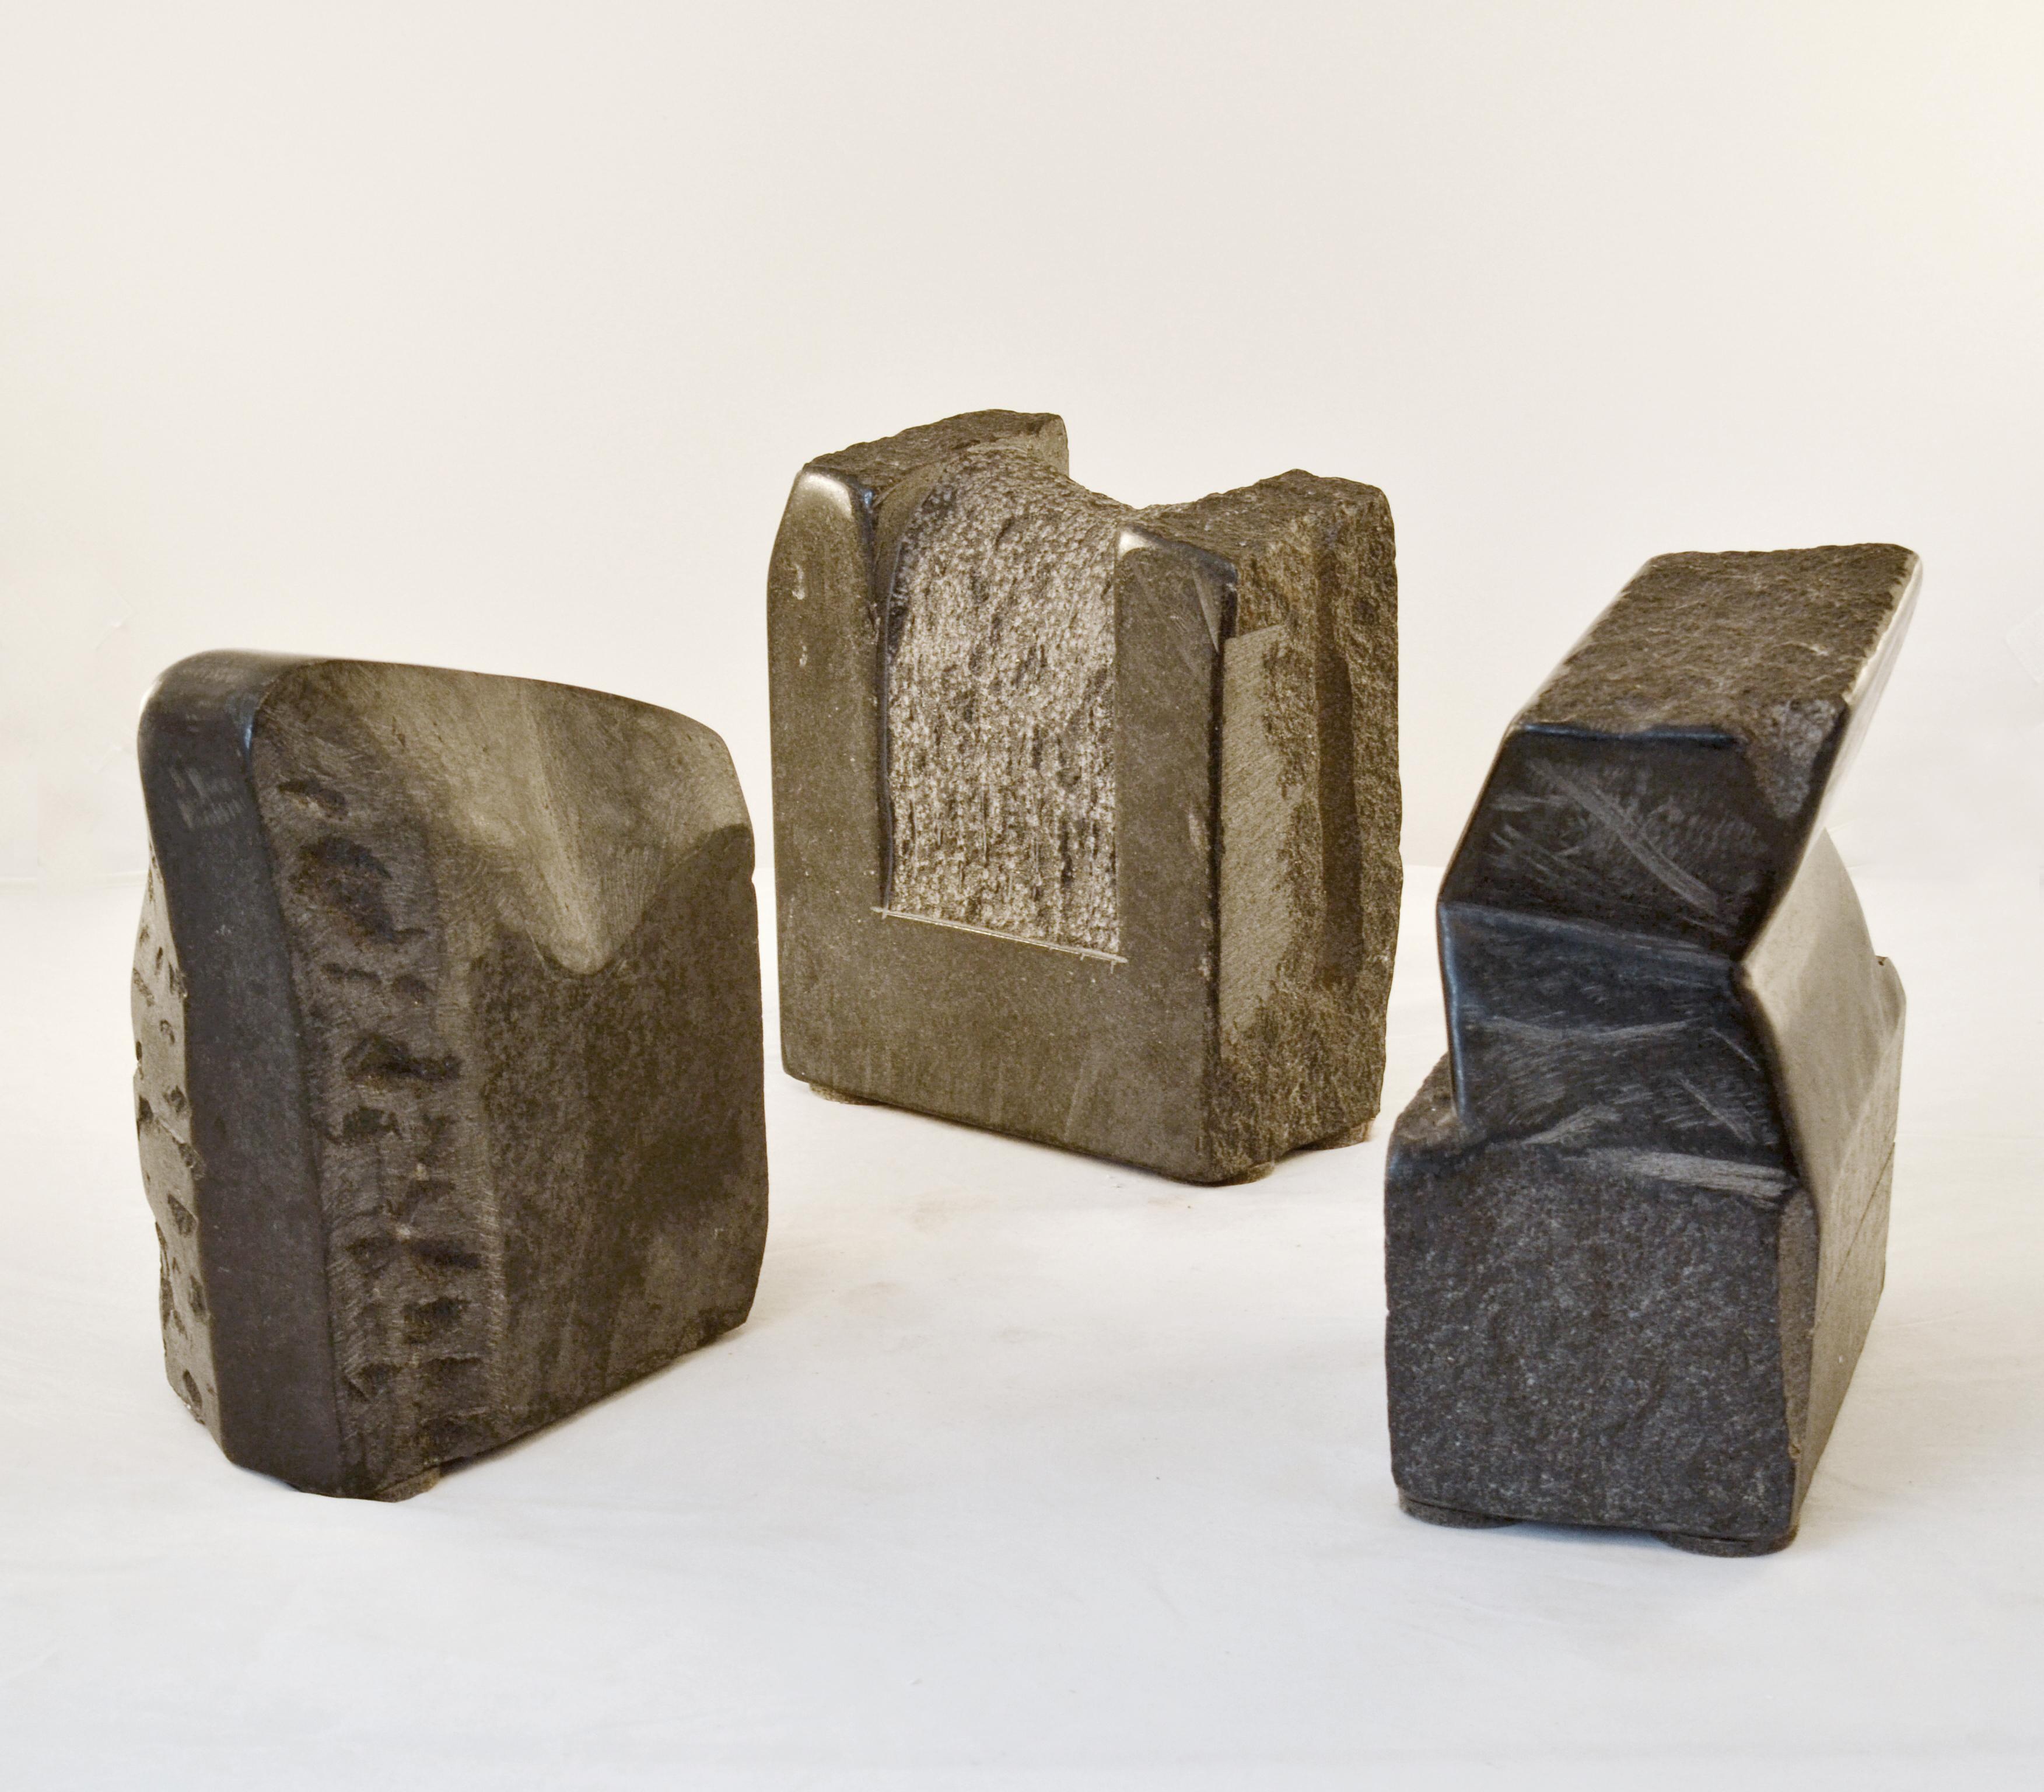 Abstract sculpture hand carved granite by the Dutch artist J. Metaho, made in the 1970's. The part polished granite is carved with floating planes at angled positions from both sides of the sculpture. The whole stone is treated in alternating